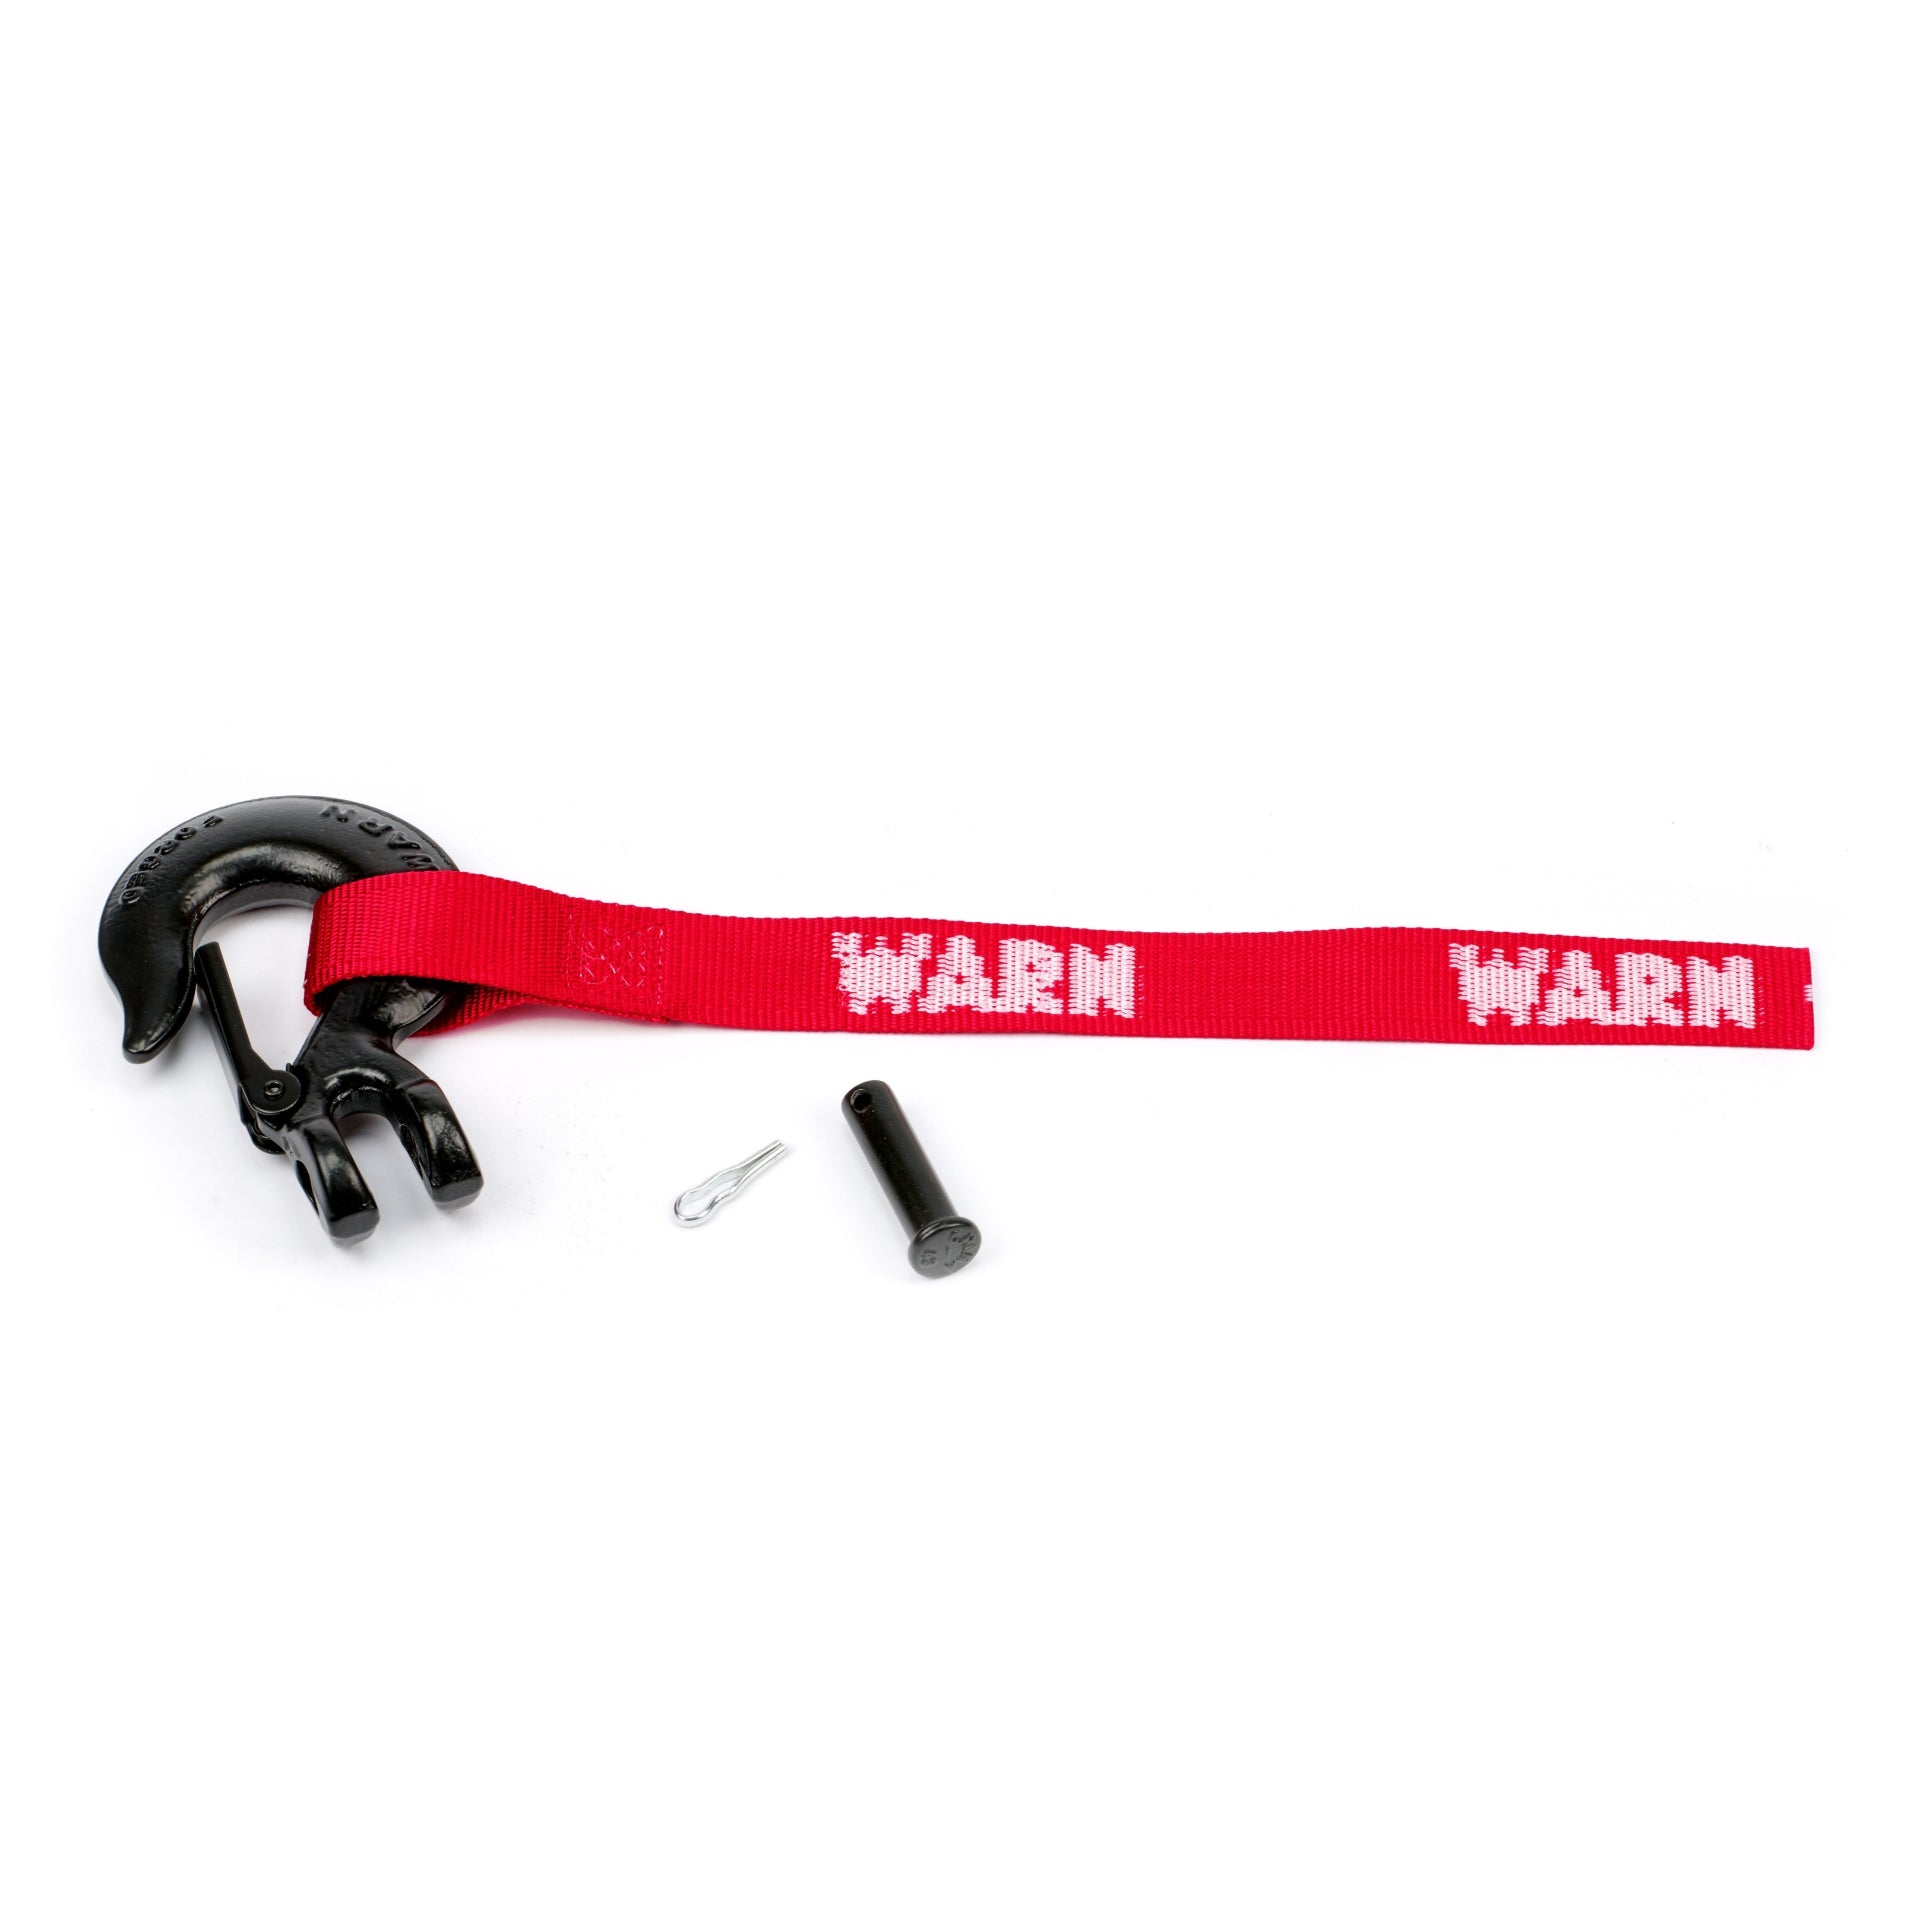 Warn Replacement ATV, UTV and SXS Winch Hook with Strap - Custom